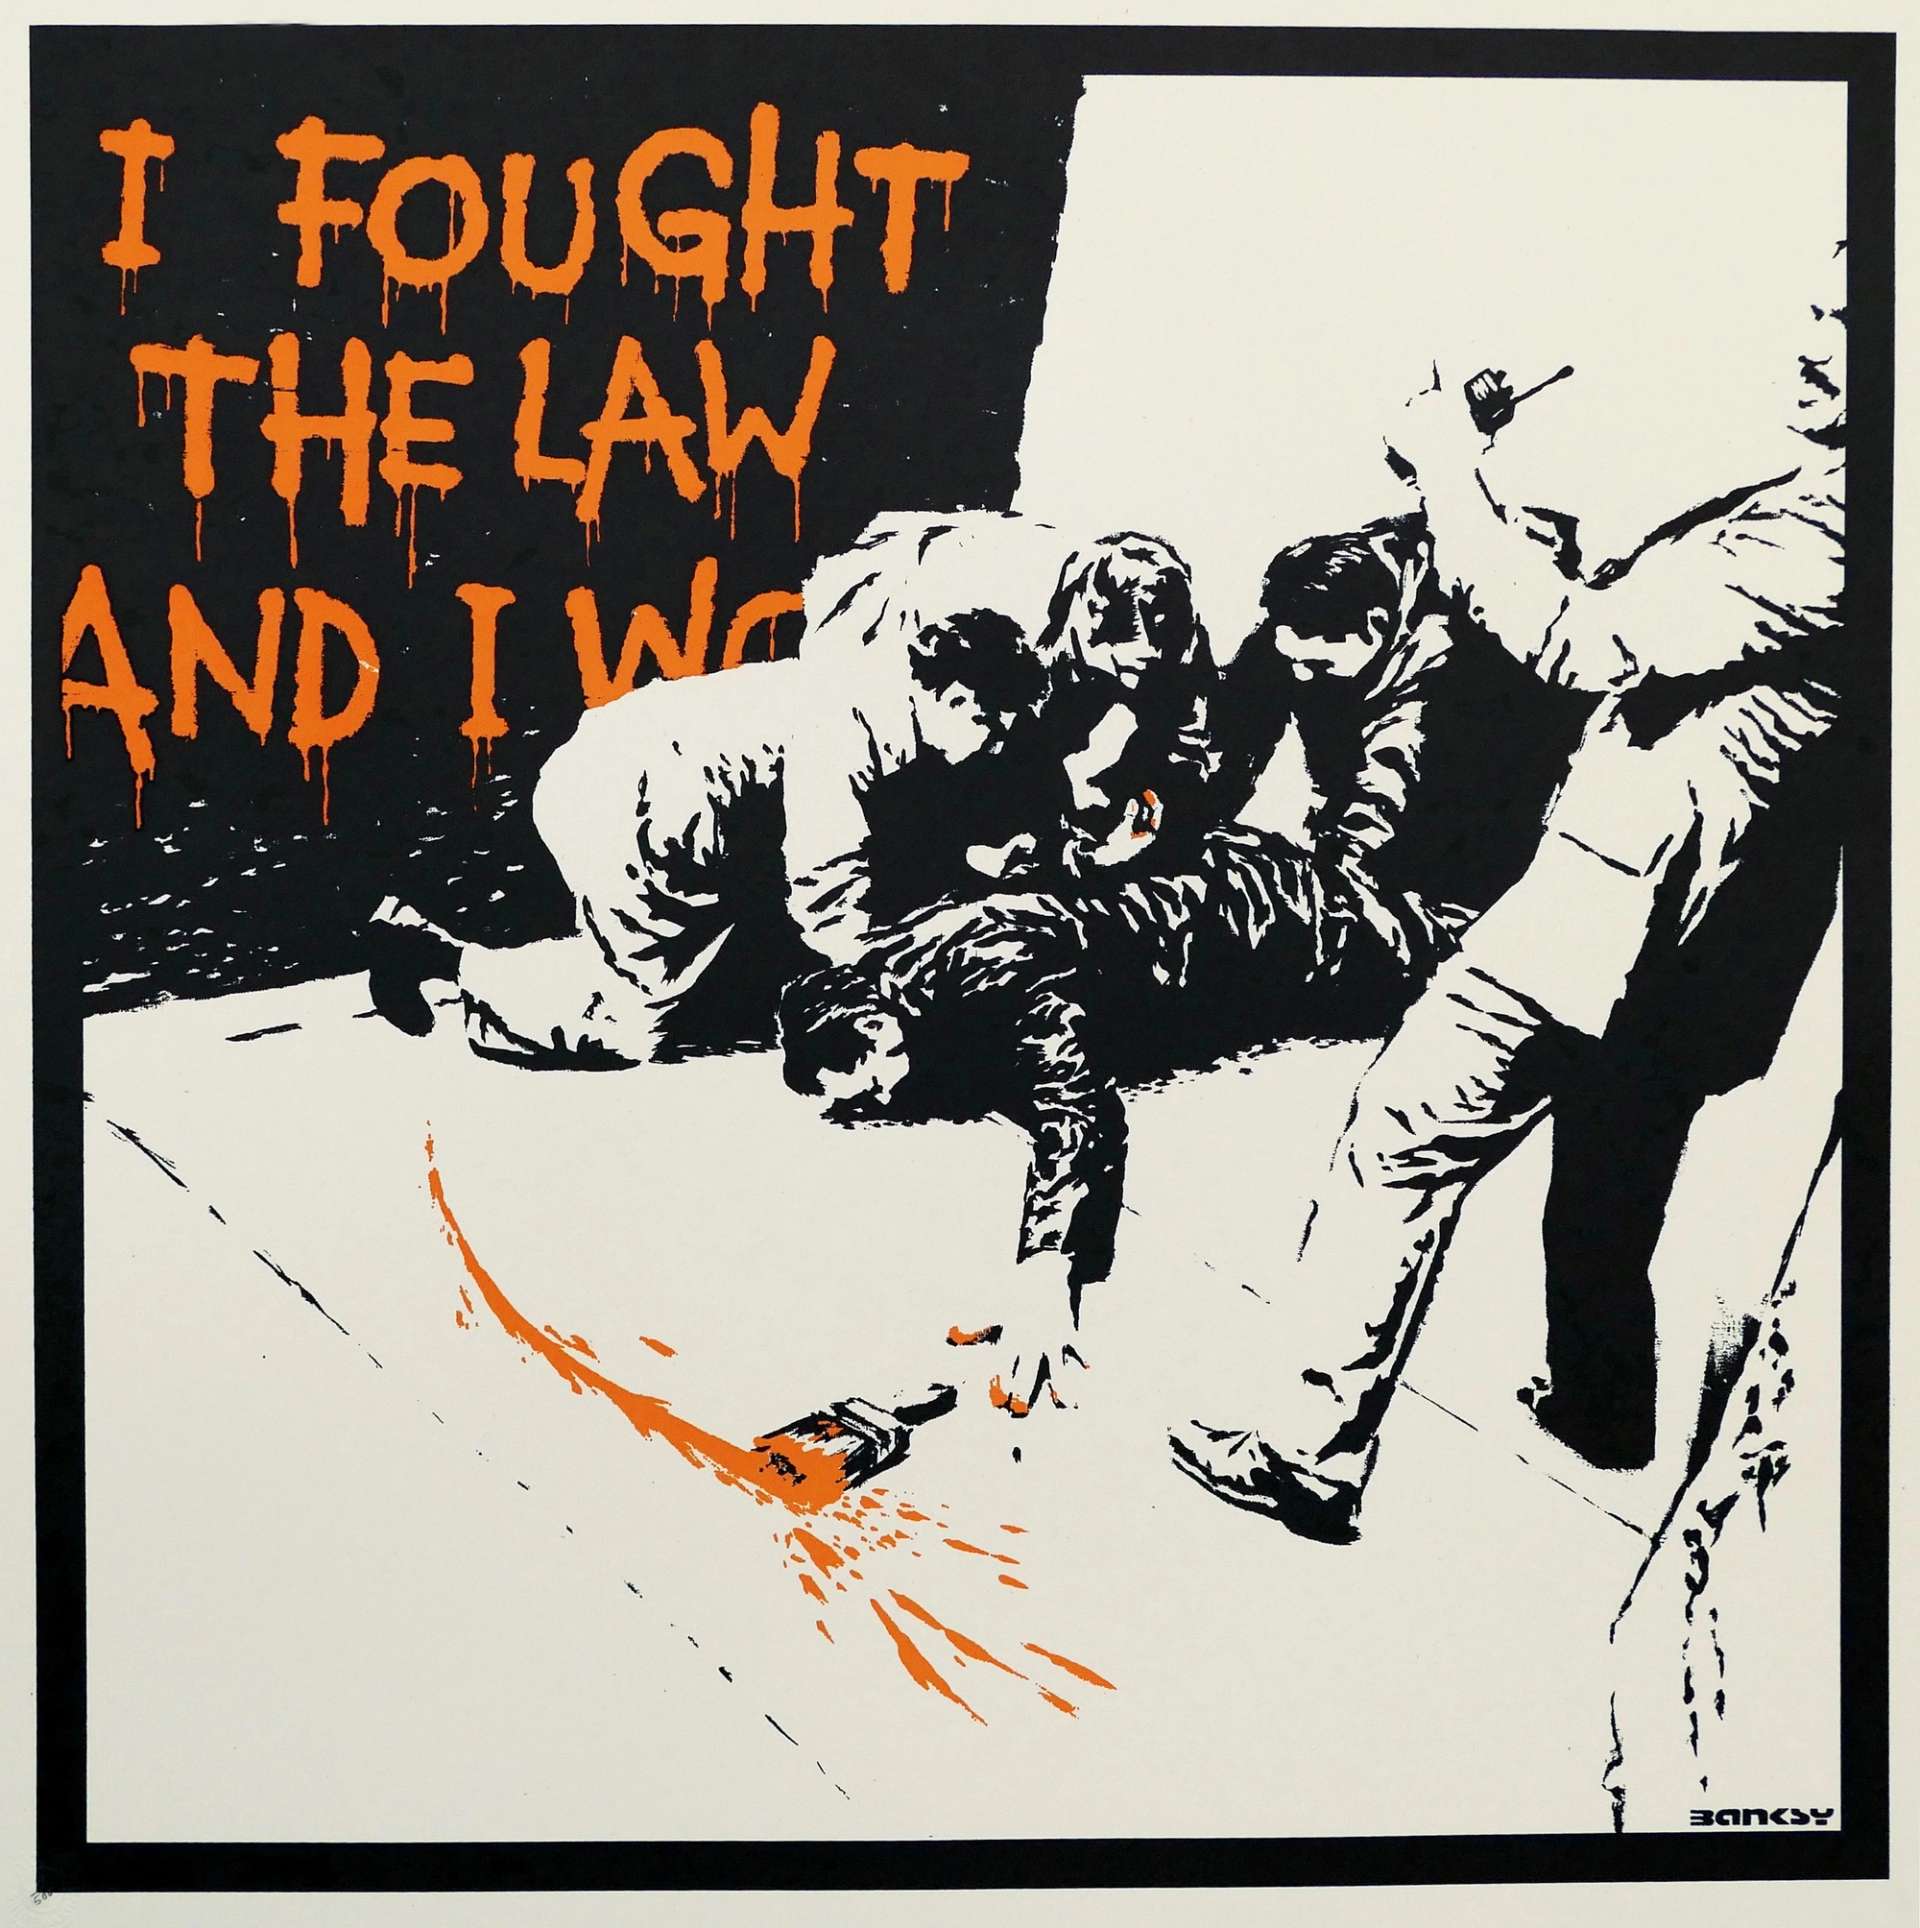 I Fought The Law by Bansky